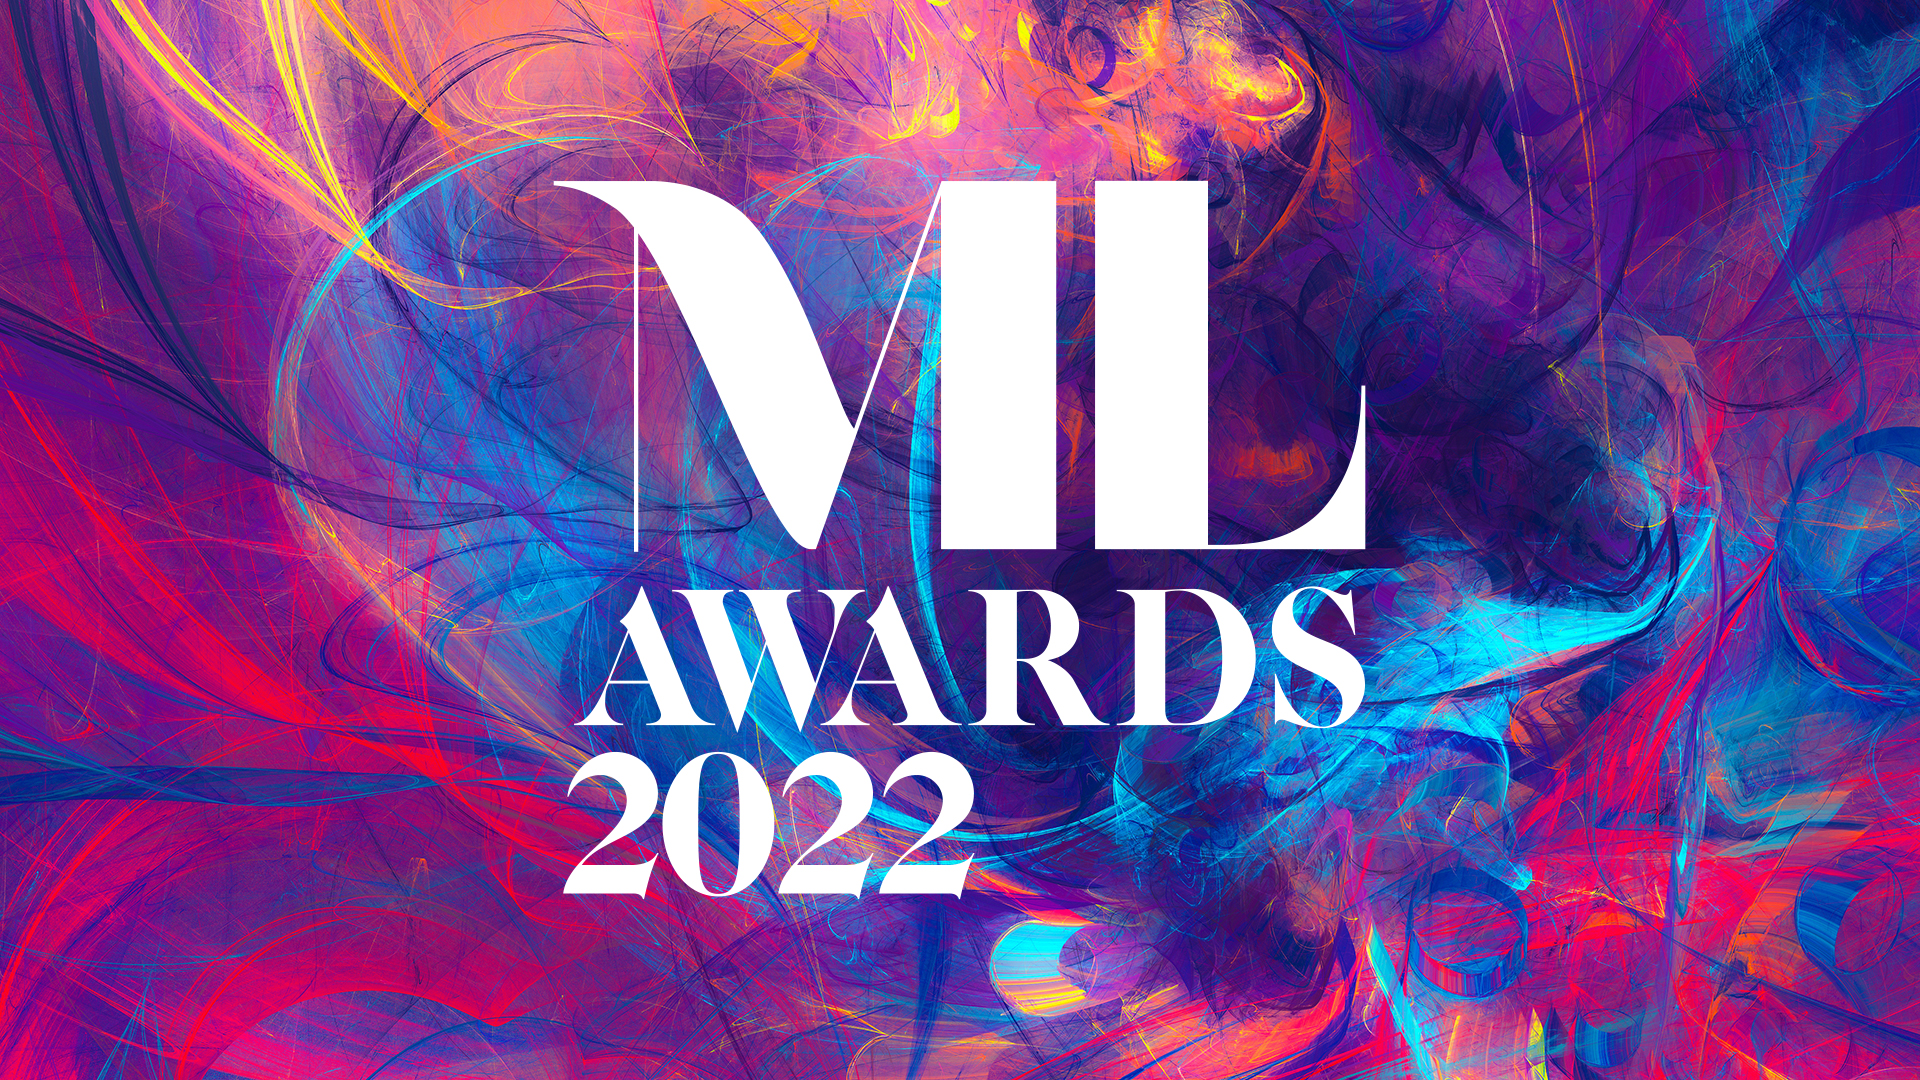 Manchester Legal Awards 2022 image